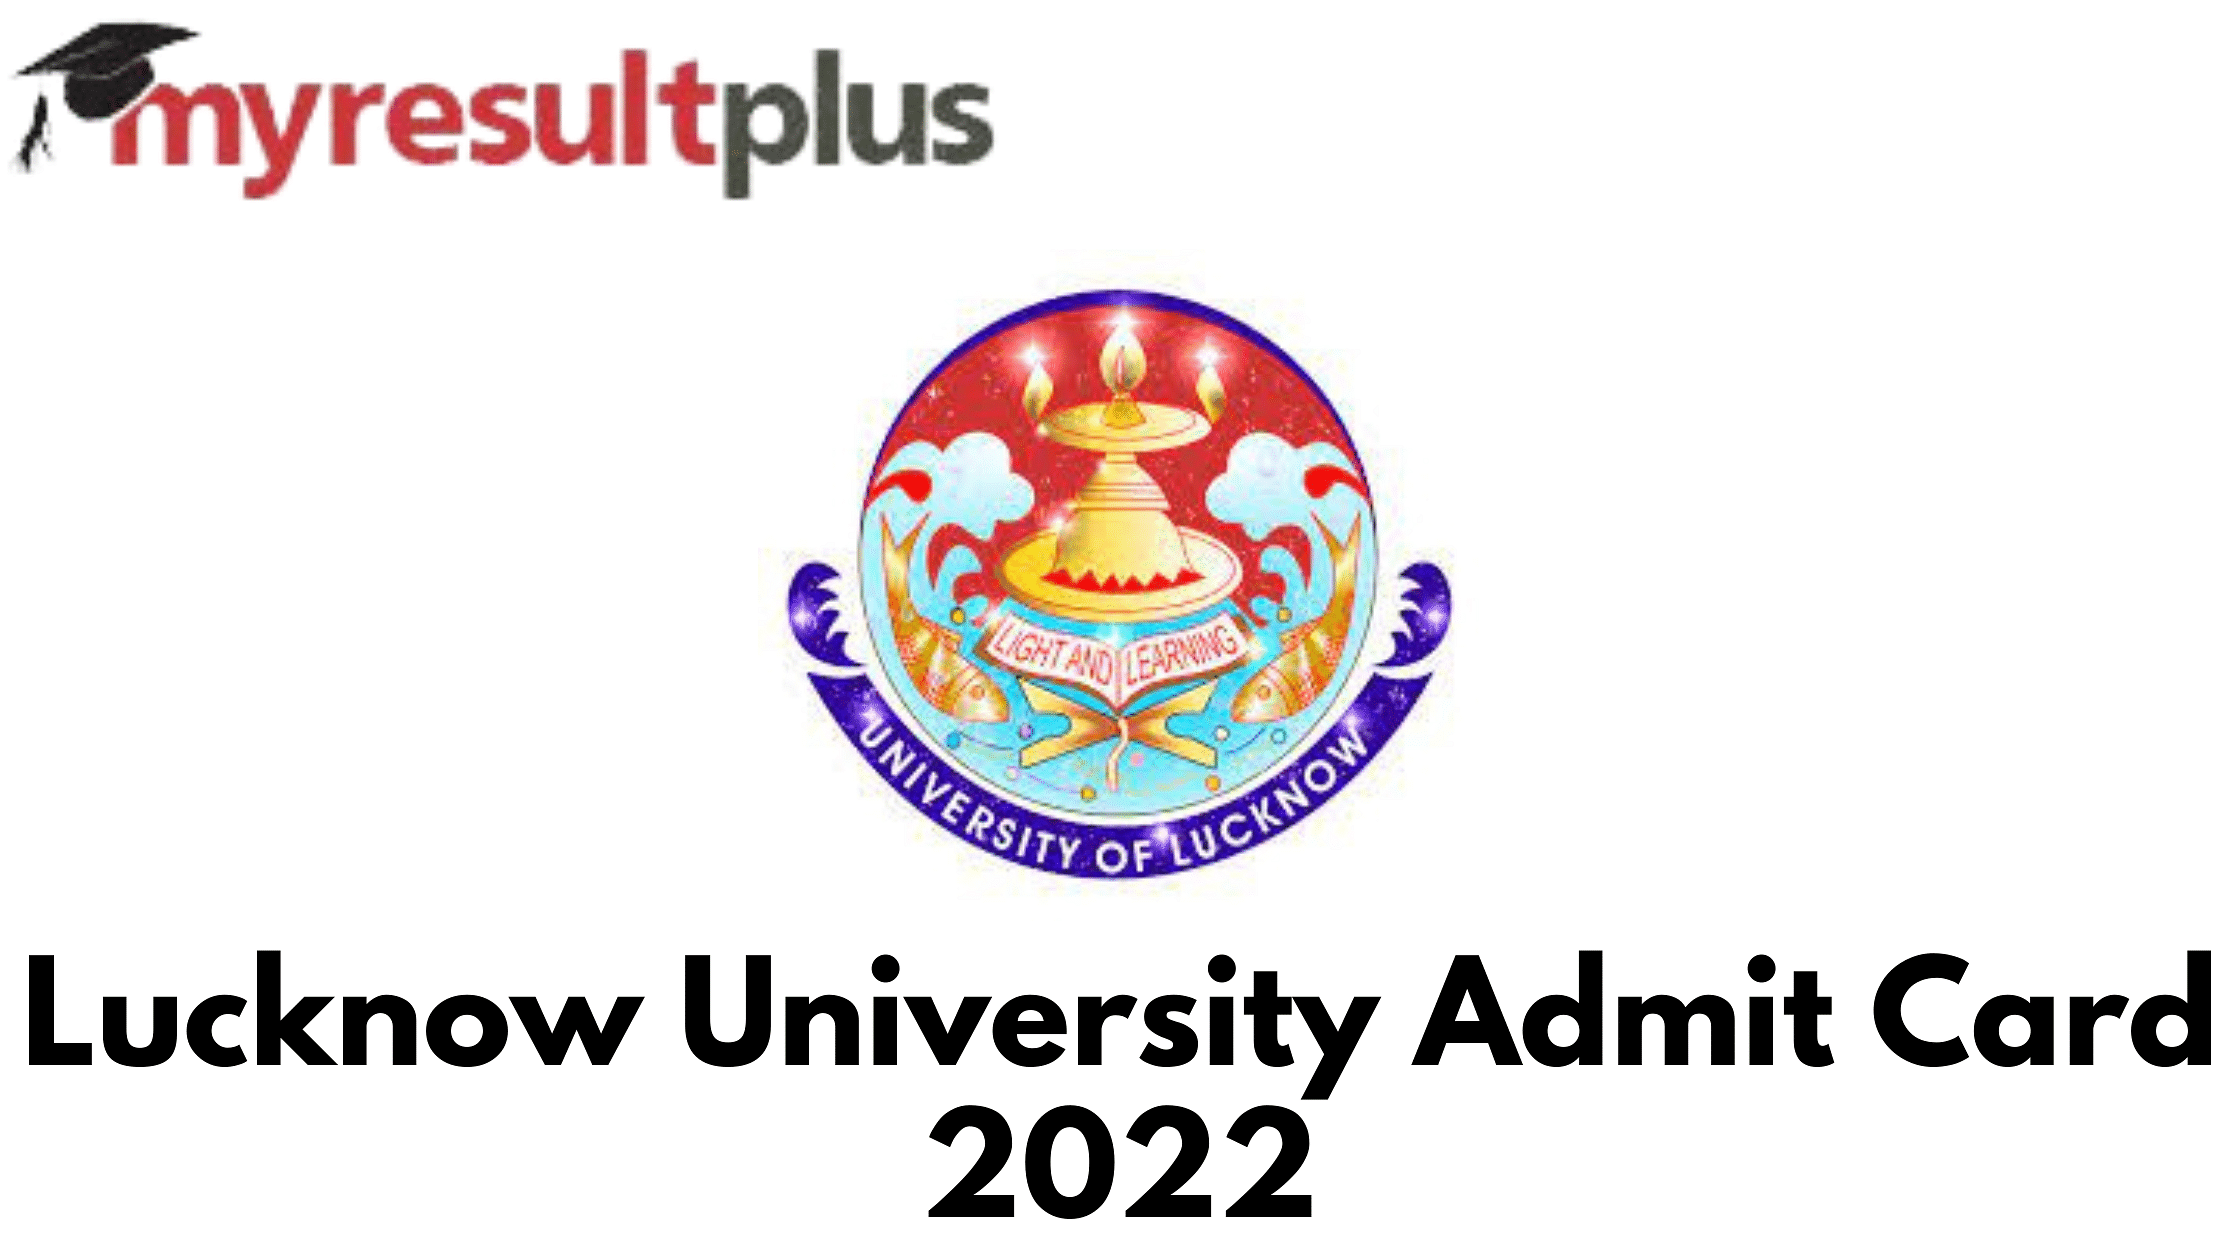 Lucknow University Admit Card 2022 Available For Download, Direct Link